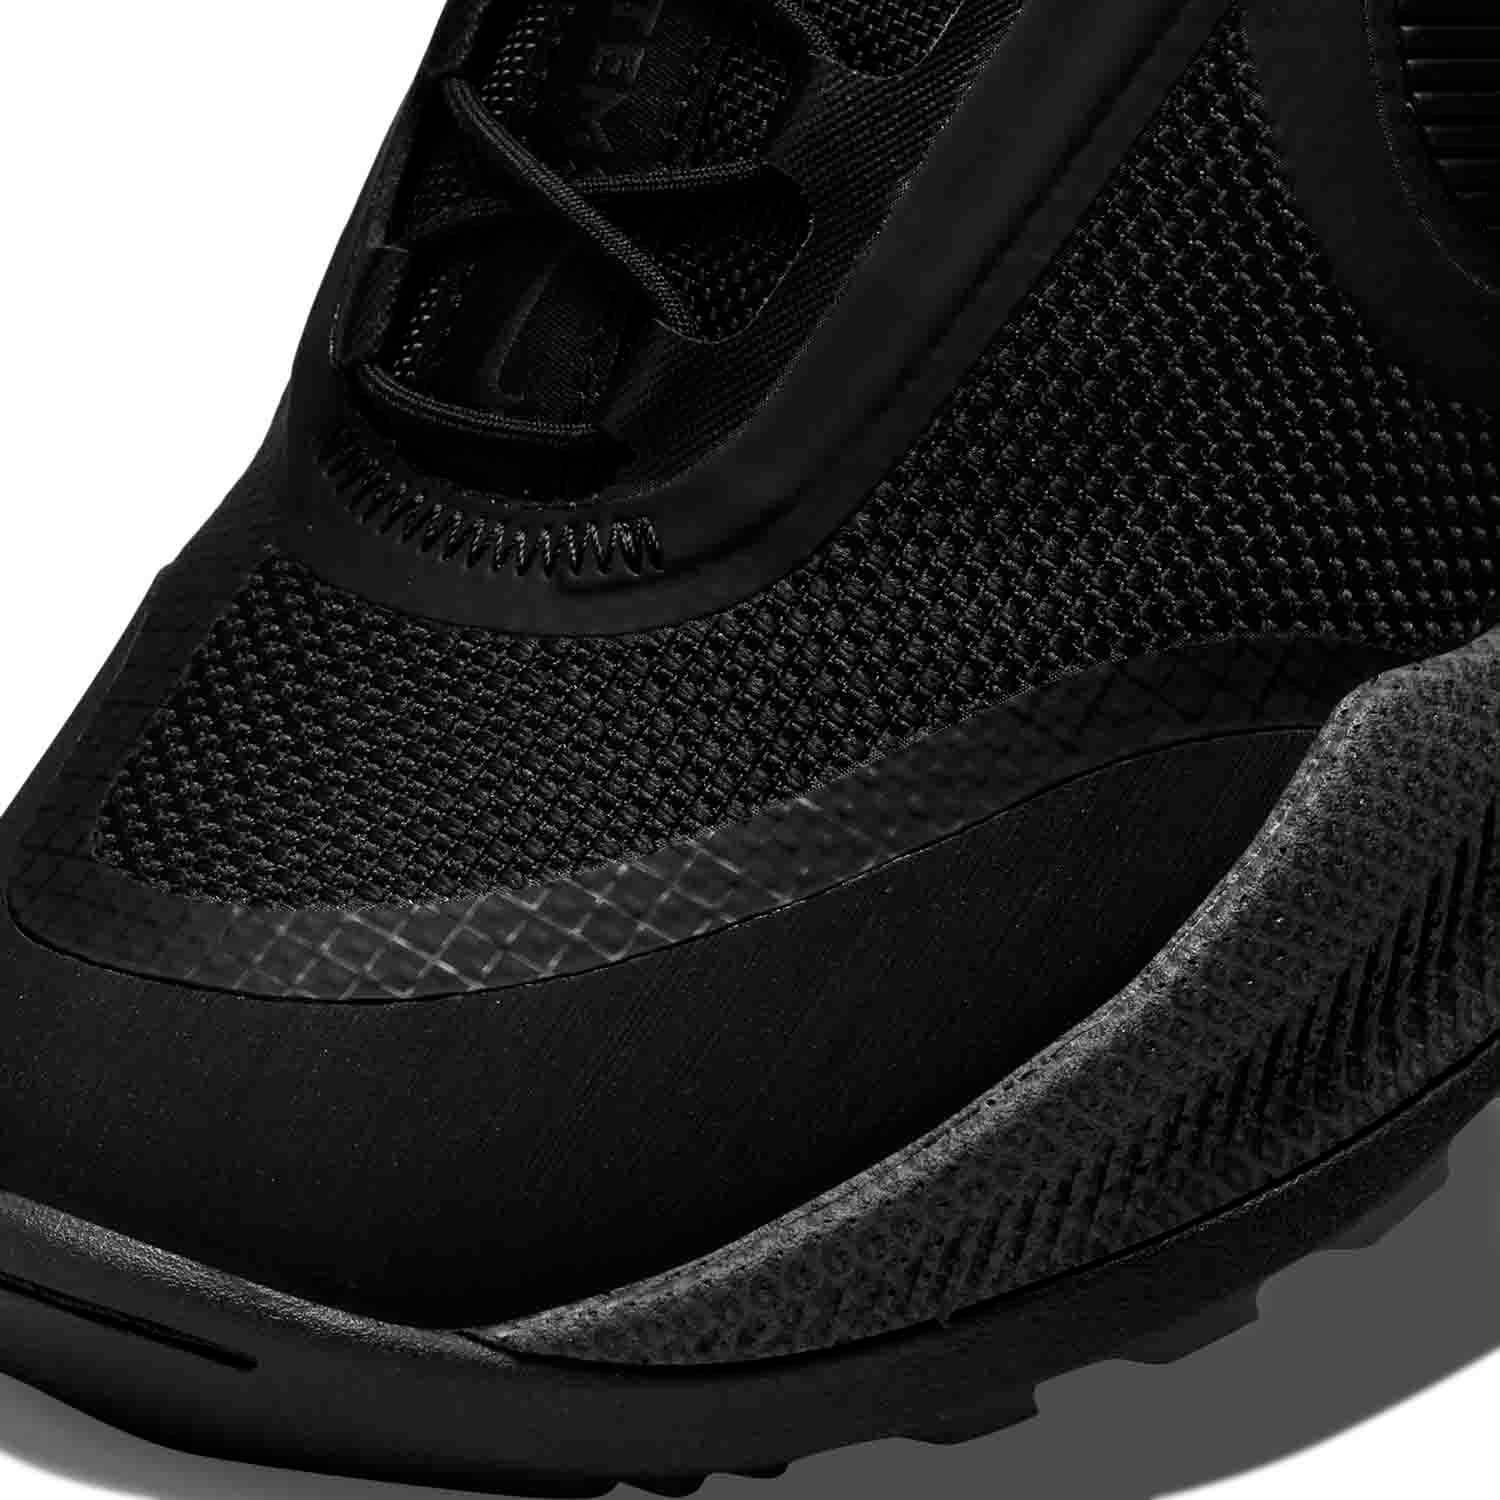 Nike React Men's SFB Carbon Tactical Boots | Nike Boots